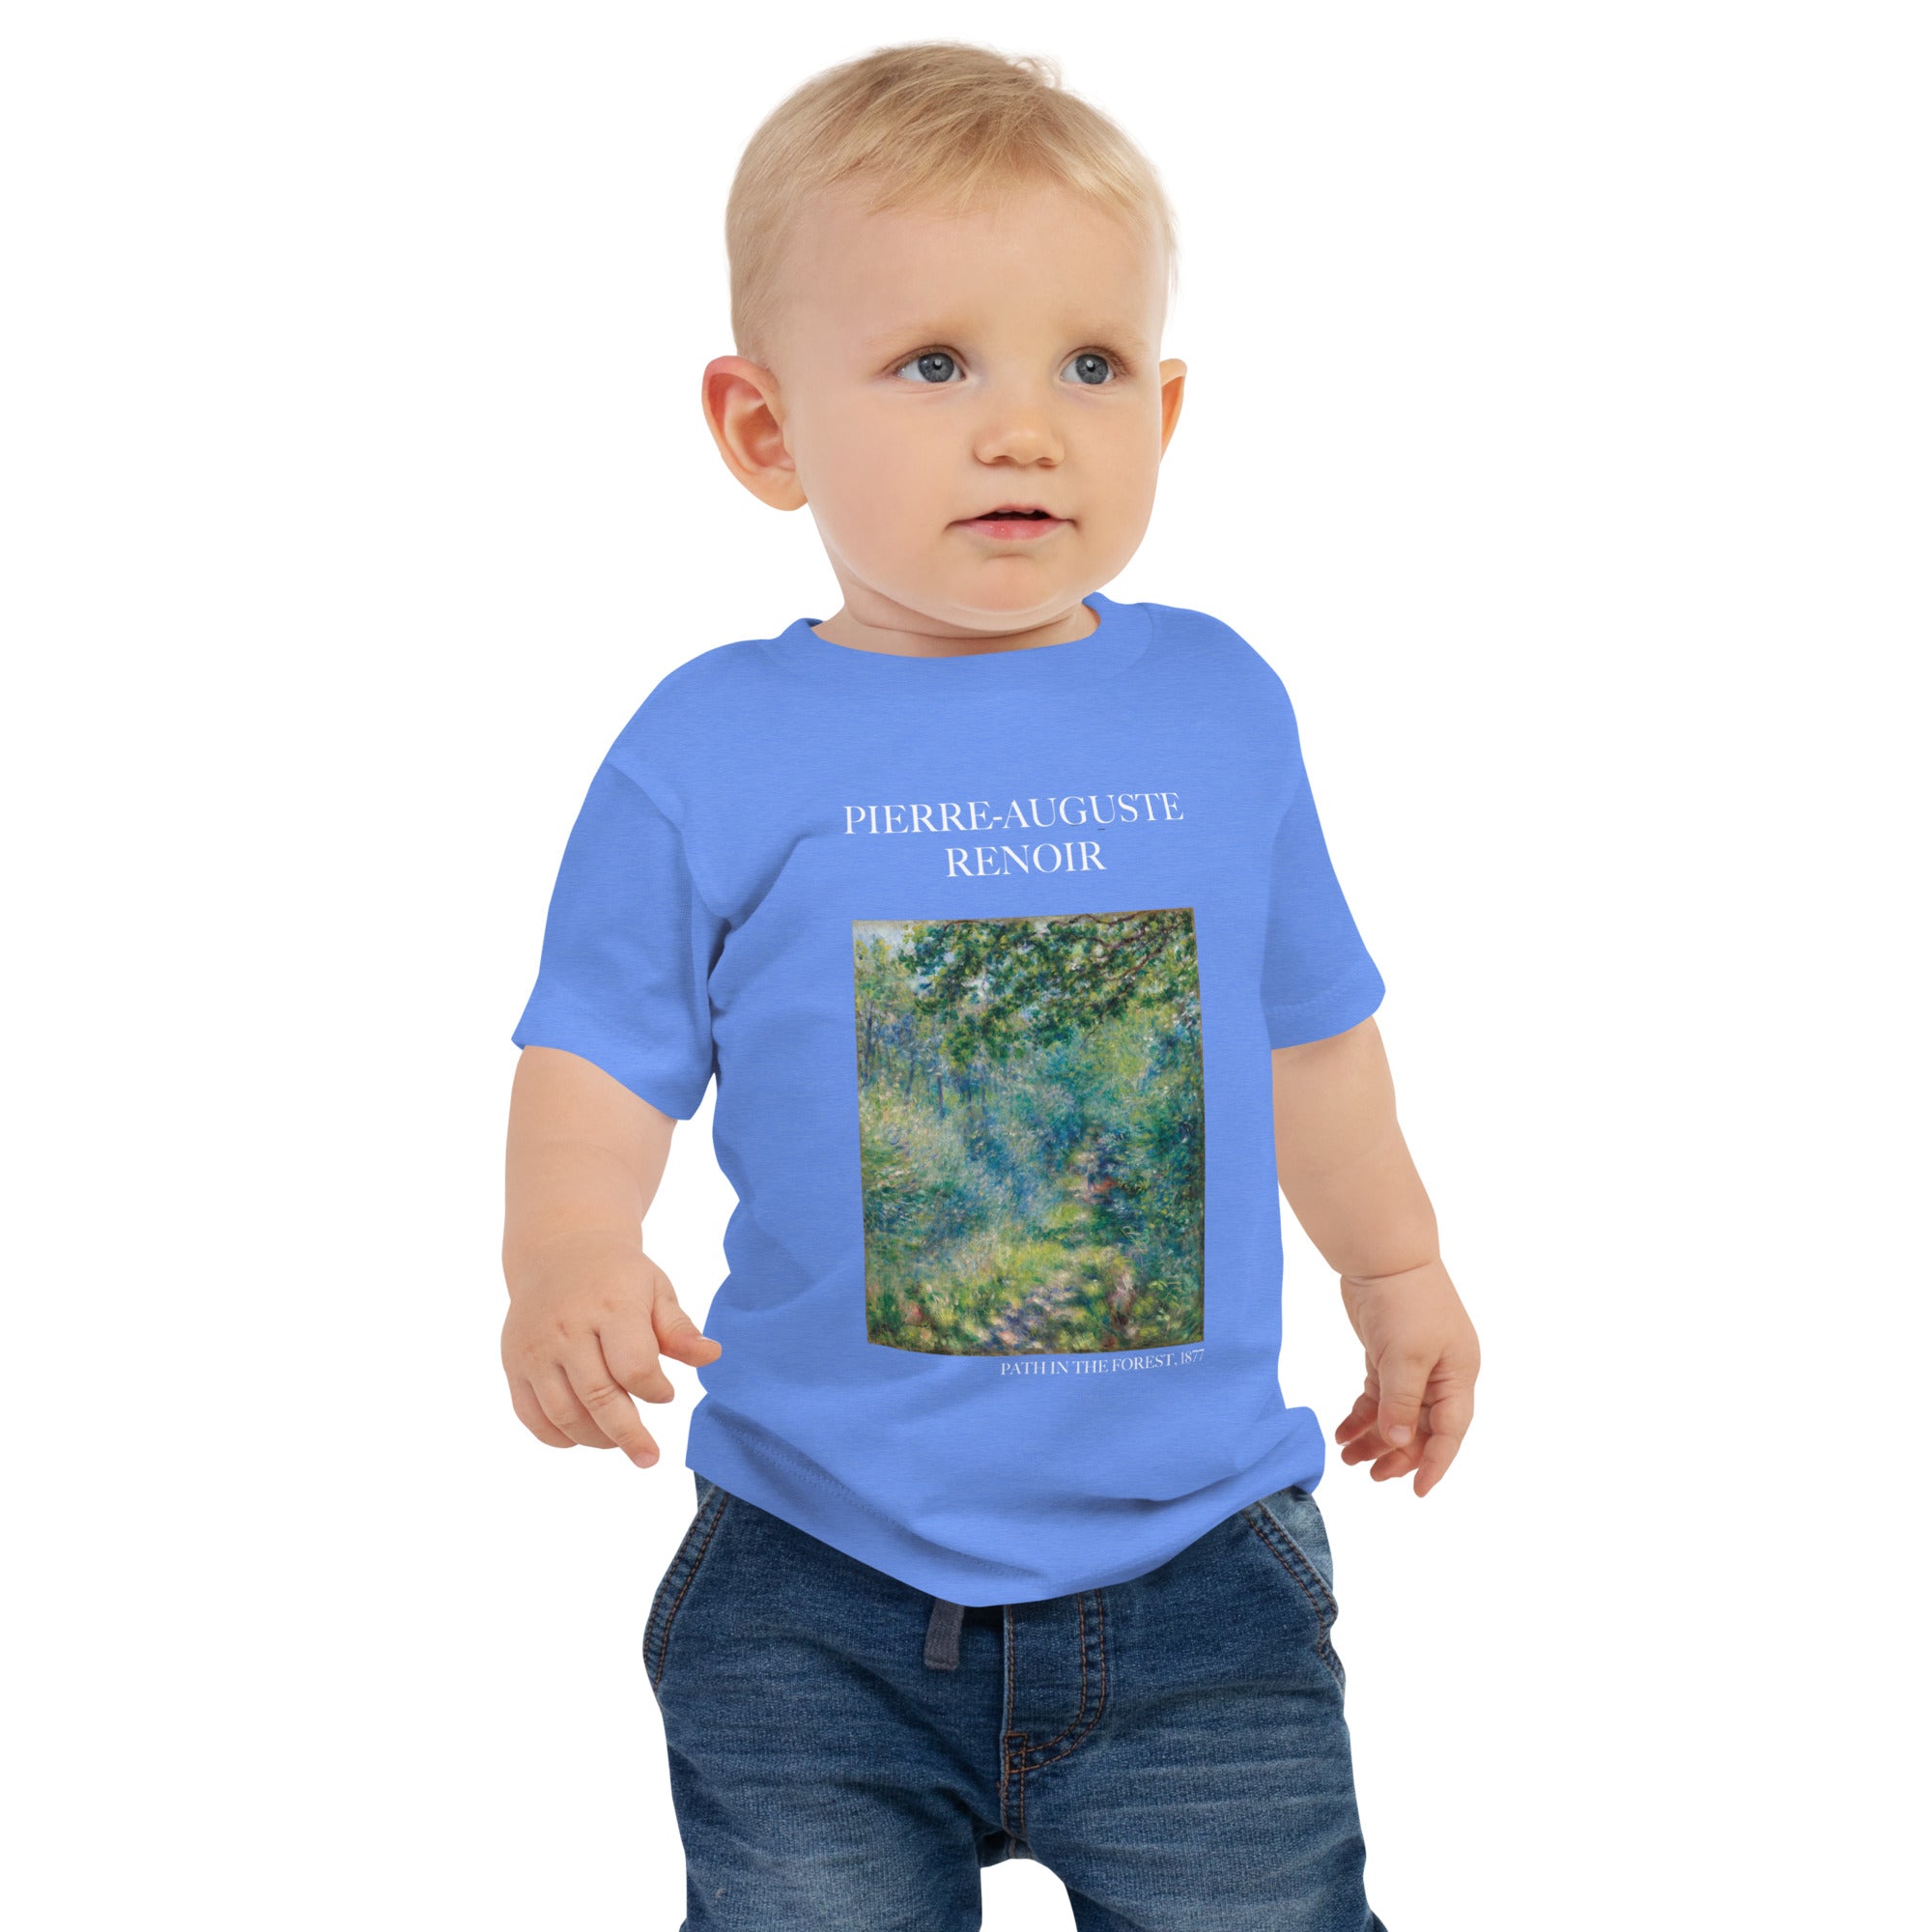 Pierre-Auguste Renoir 'Path in the Forest' Famous Painting Baby Staple T-Shirt | Premium Baby Art Tee